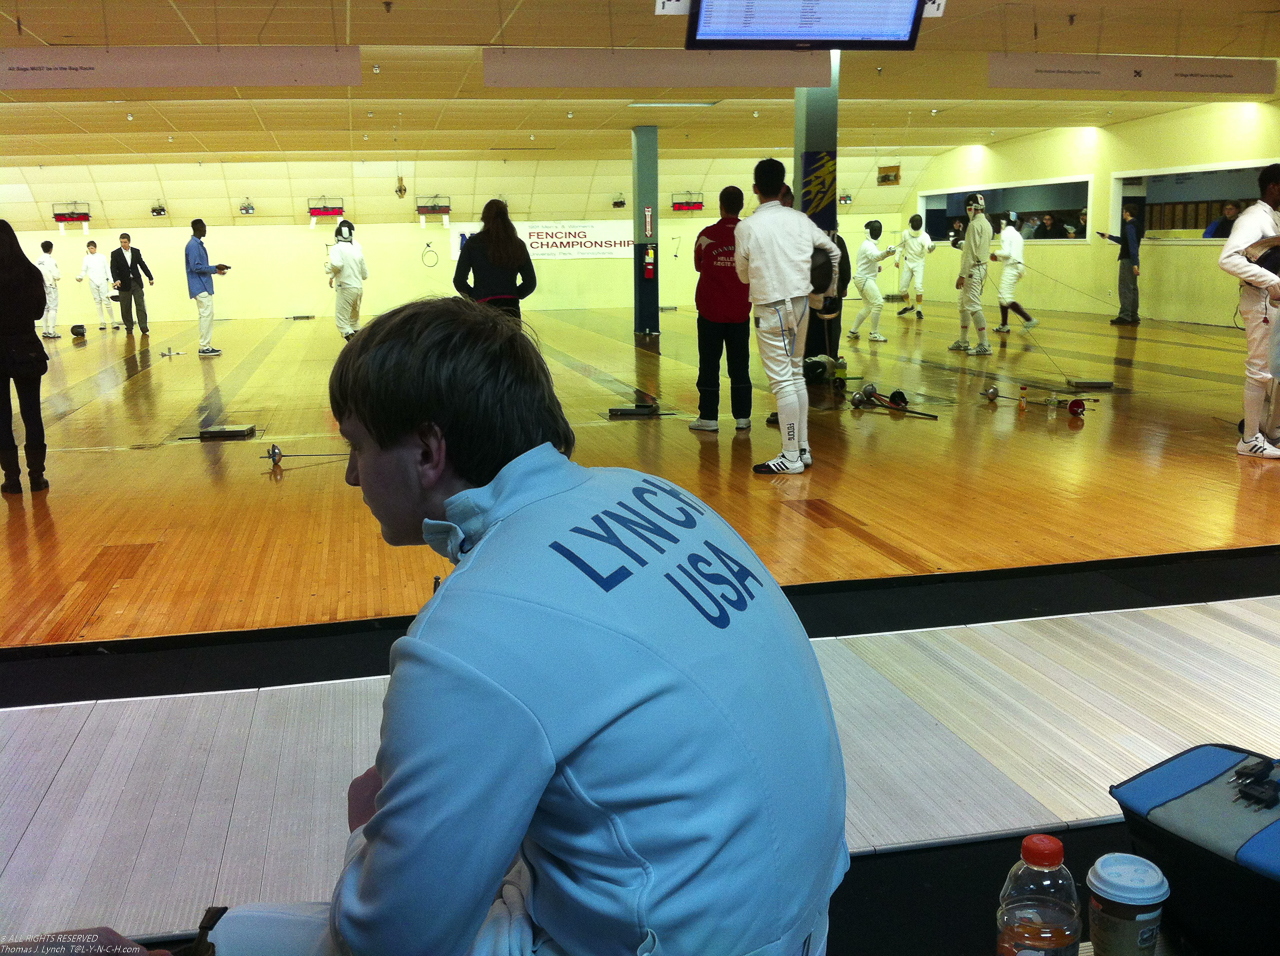 Mission Fencing Epee Trournement  ~~  